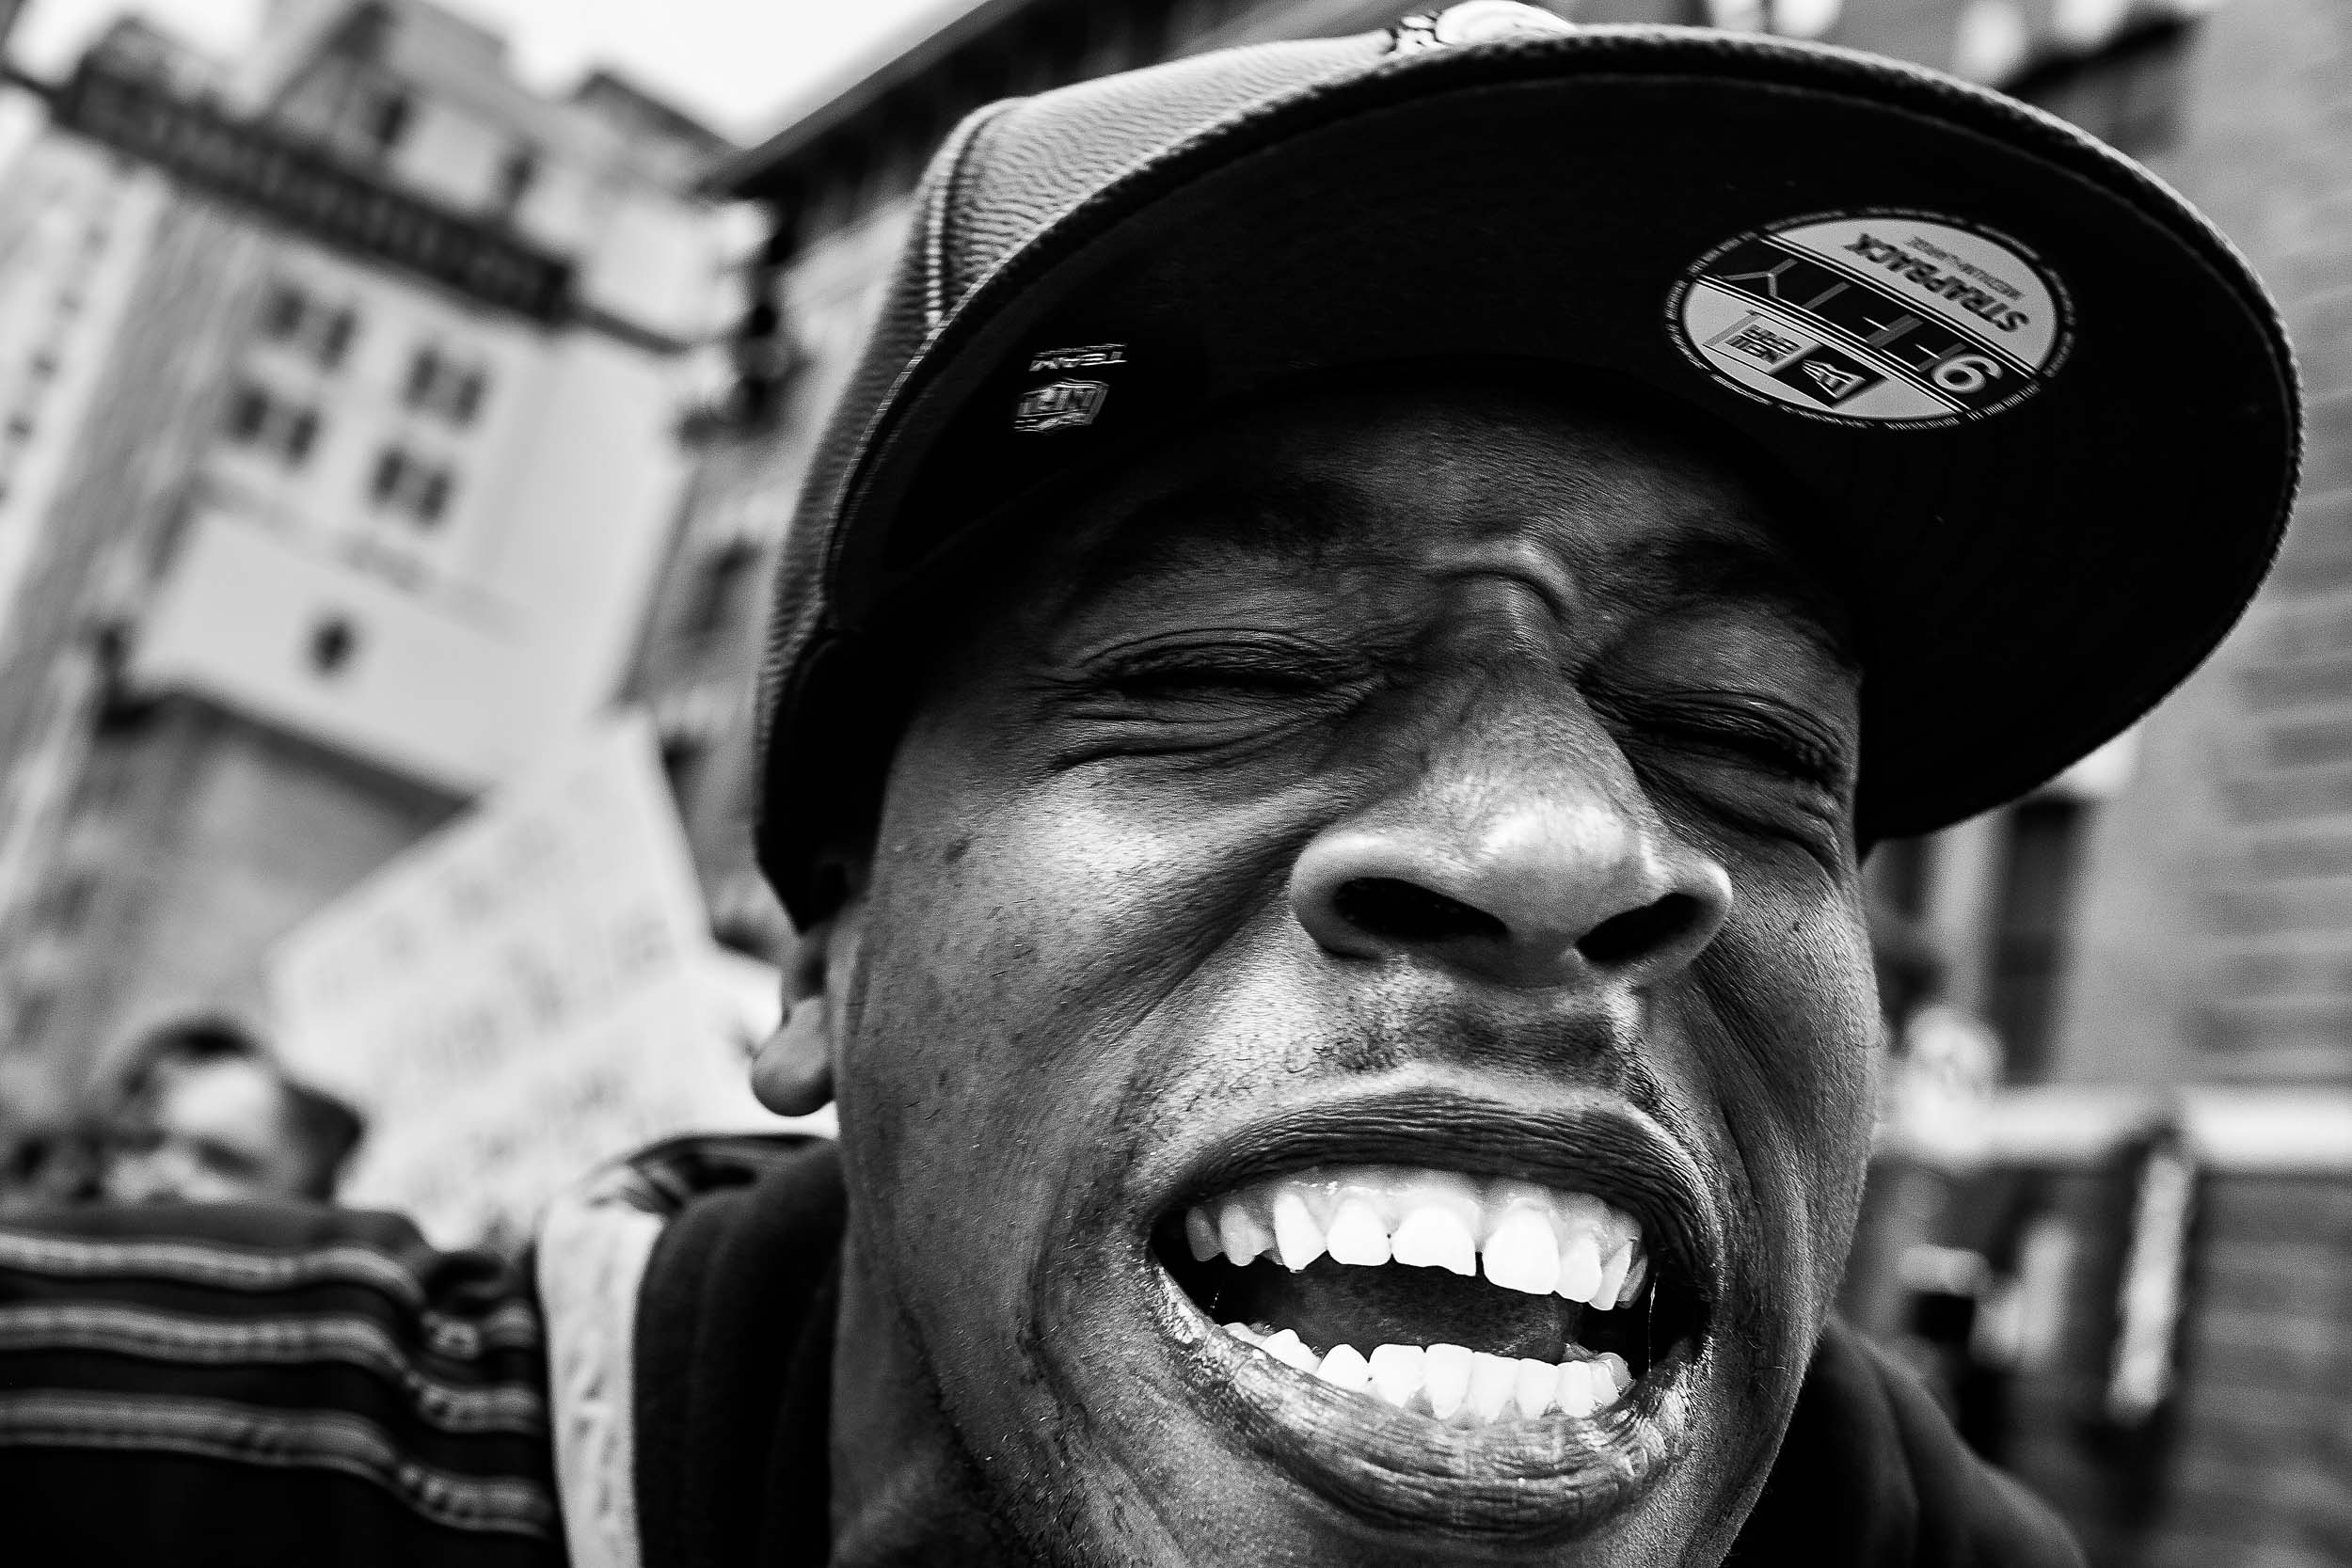 NEW YORK TIMES PHOTOJOURNALIST REPORTAGE PHOTOGRAPHER IN BALTIMORE WASHINGTON DC FREDDIE GRAY BALTIMORE UPRISING PROTEST PHOTOGRAPHY